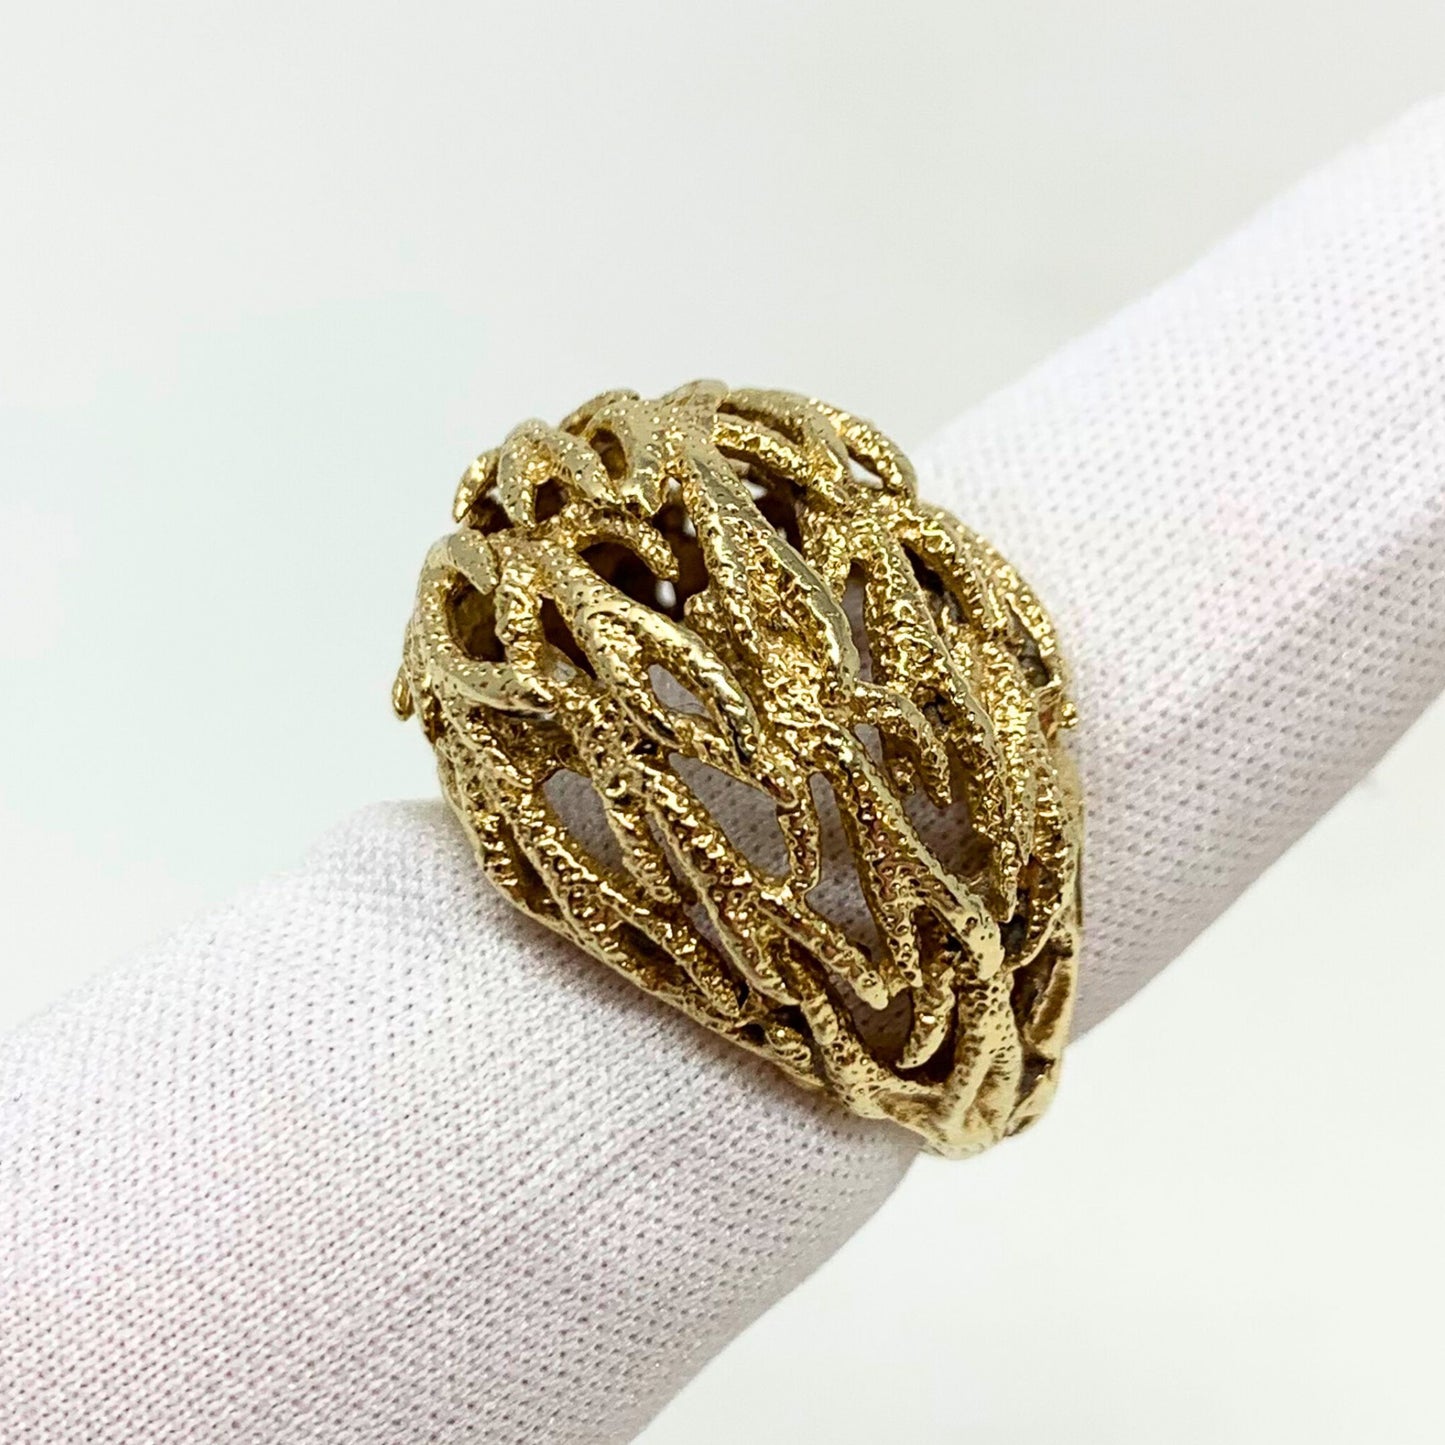 14K Gold Arabesque Dome Ring - Size 6.25